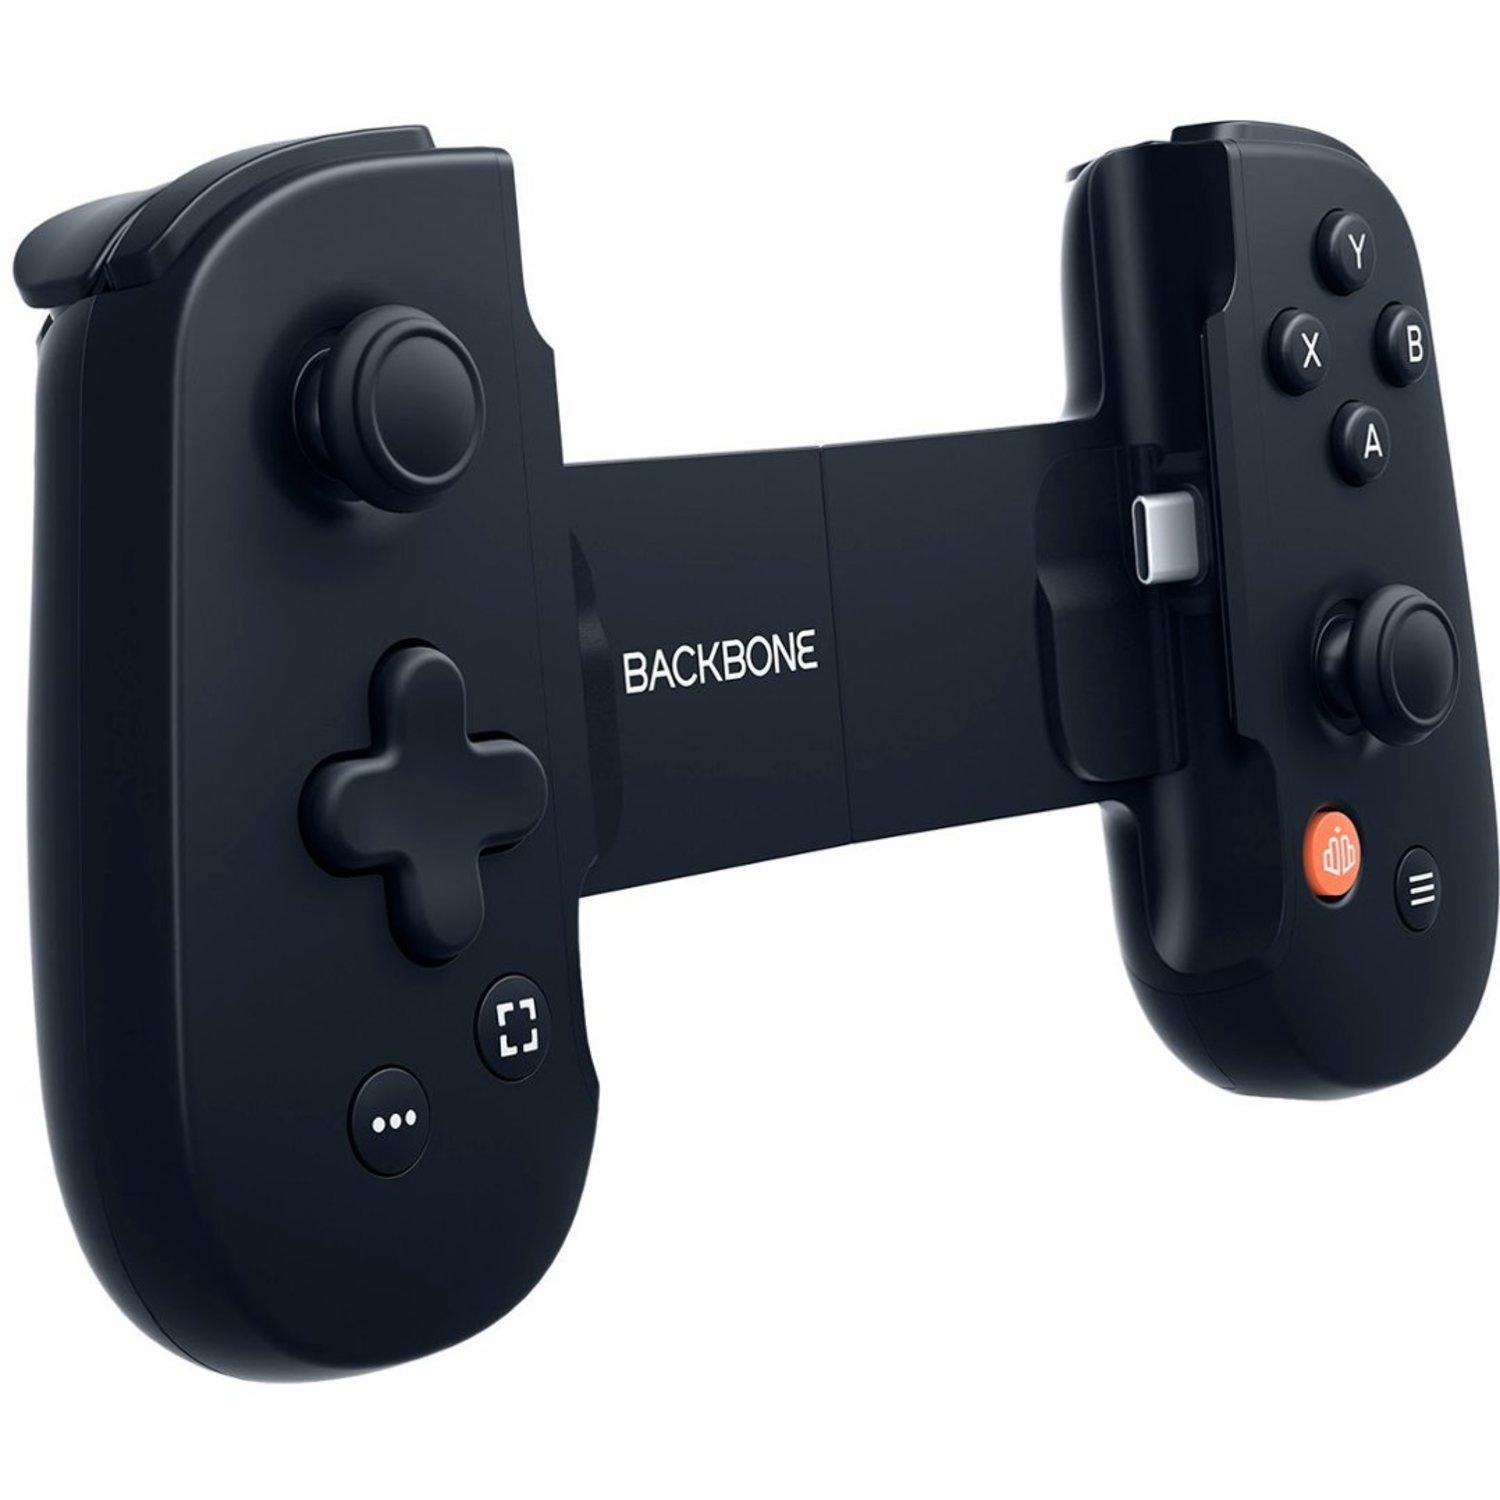 Backbone One PlayStation Edition (USB-C) Mobile Gaming Controller